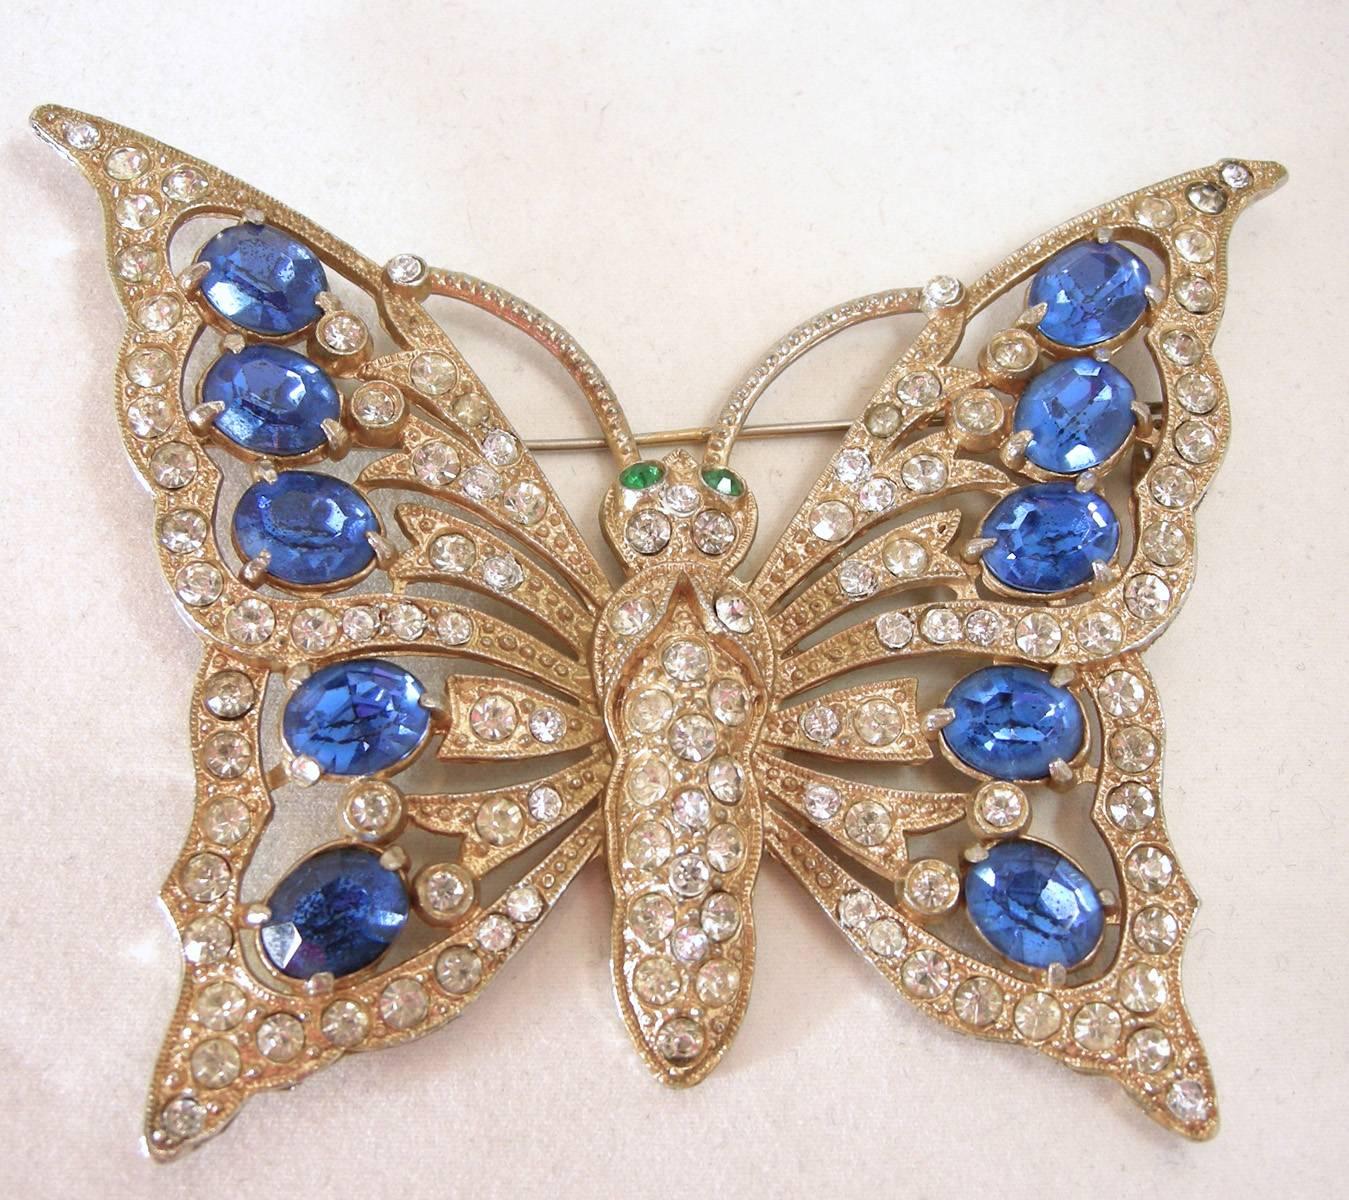 This is one of the most sought after butterfly Staret brooches.  It was made in the 1930s with a gold tone metal finish.  The wings and body have rhinestones throughout its body and green rhinestones for its eyes.  The wings have blue crystals.  It